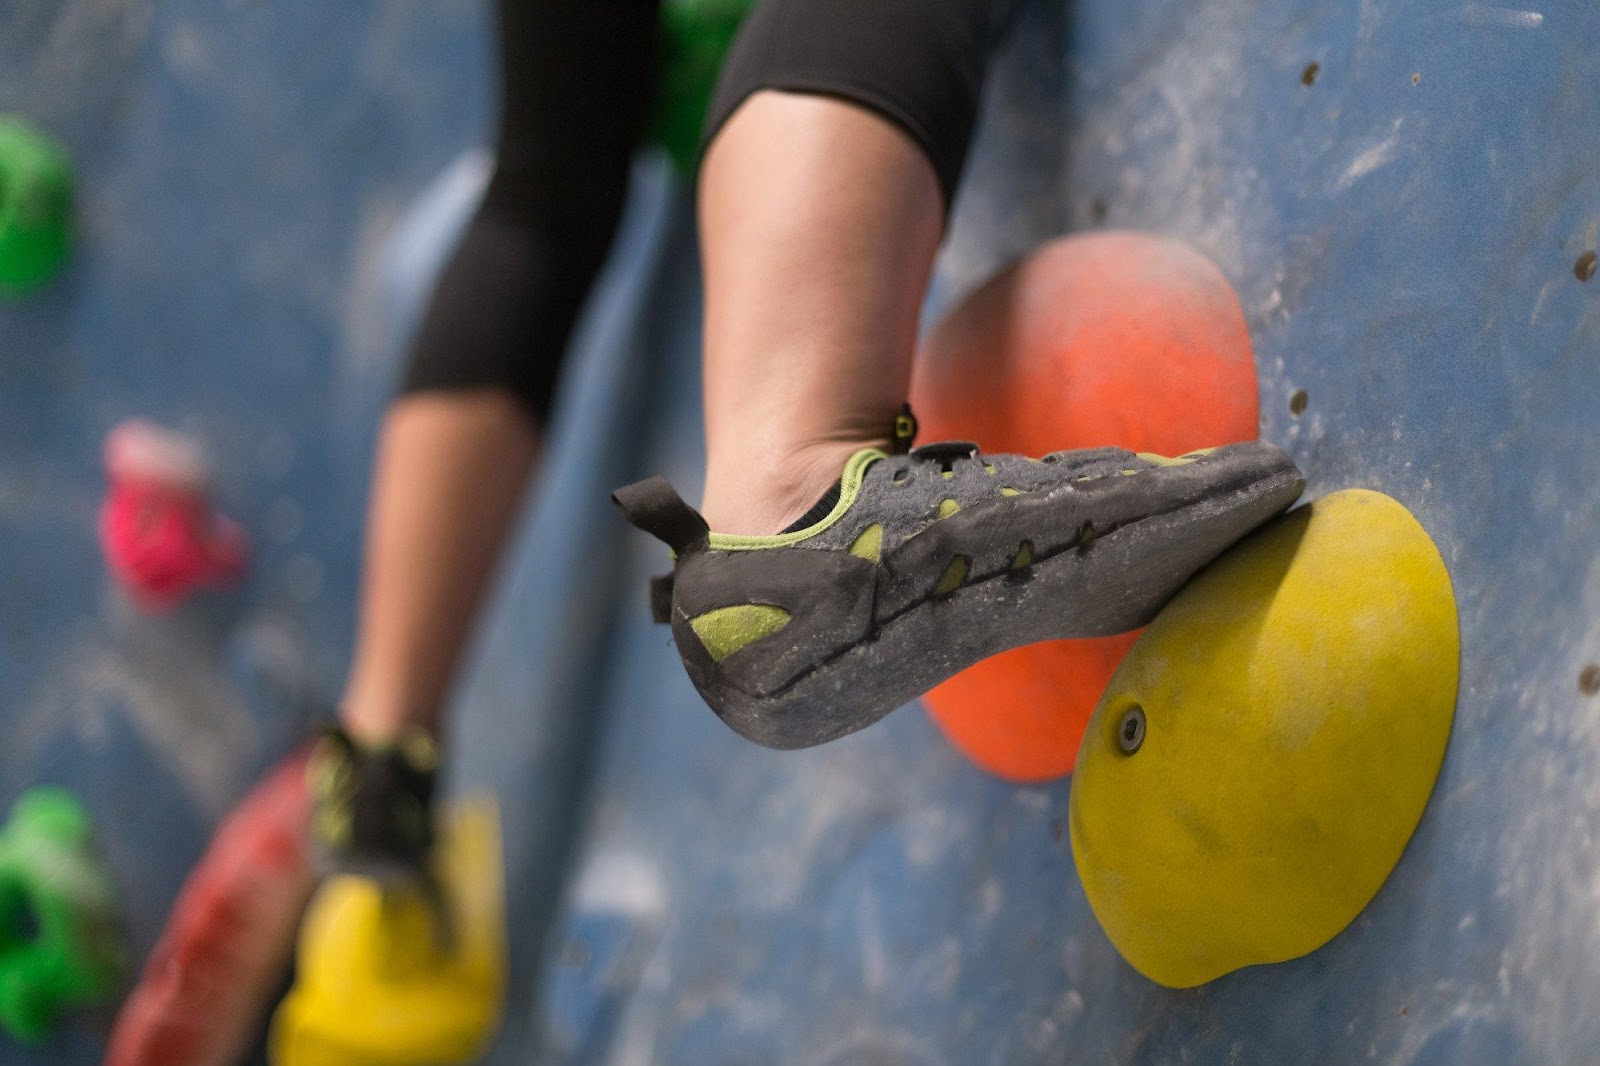 Finding The Perfect Grip: How Should Climbing Shoes Fit?